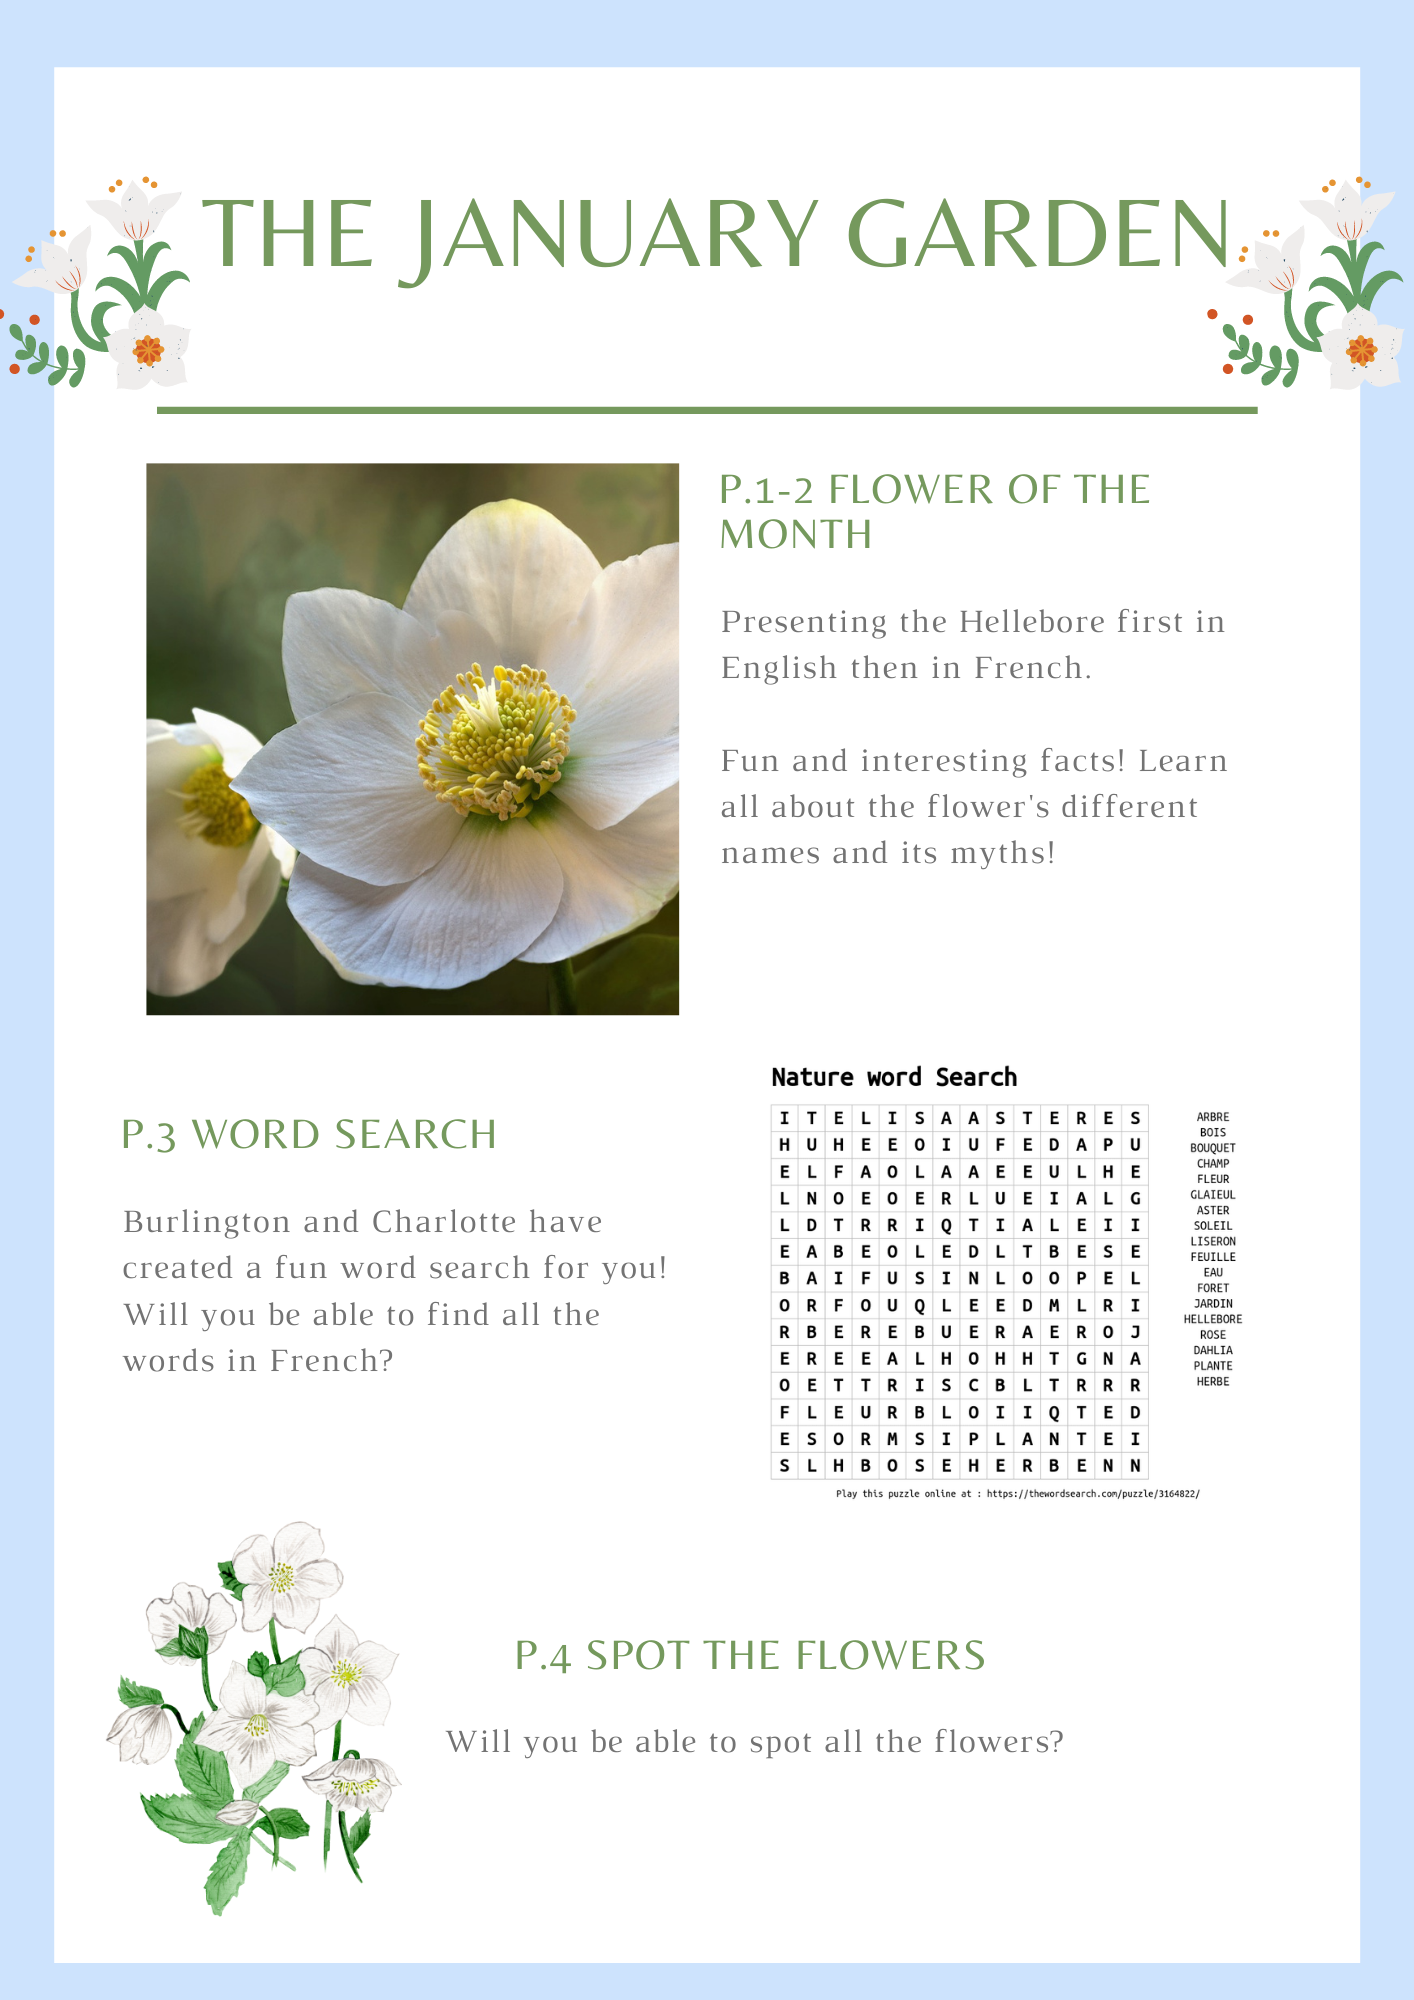 Fun facts about flowers for children - Learn all about the hellebore - Charlotte and Burlington family club